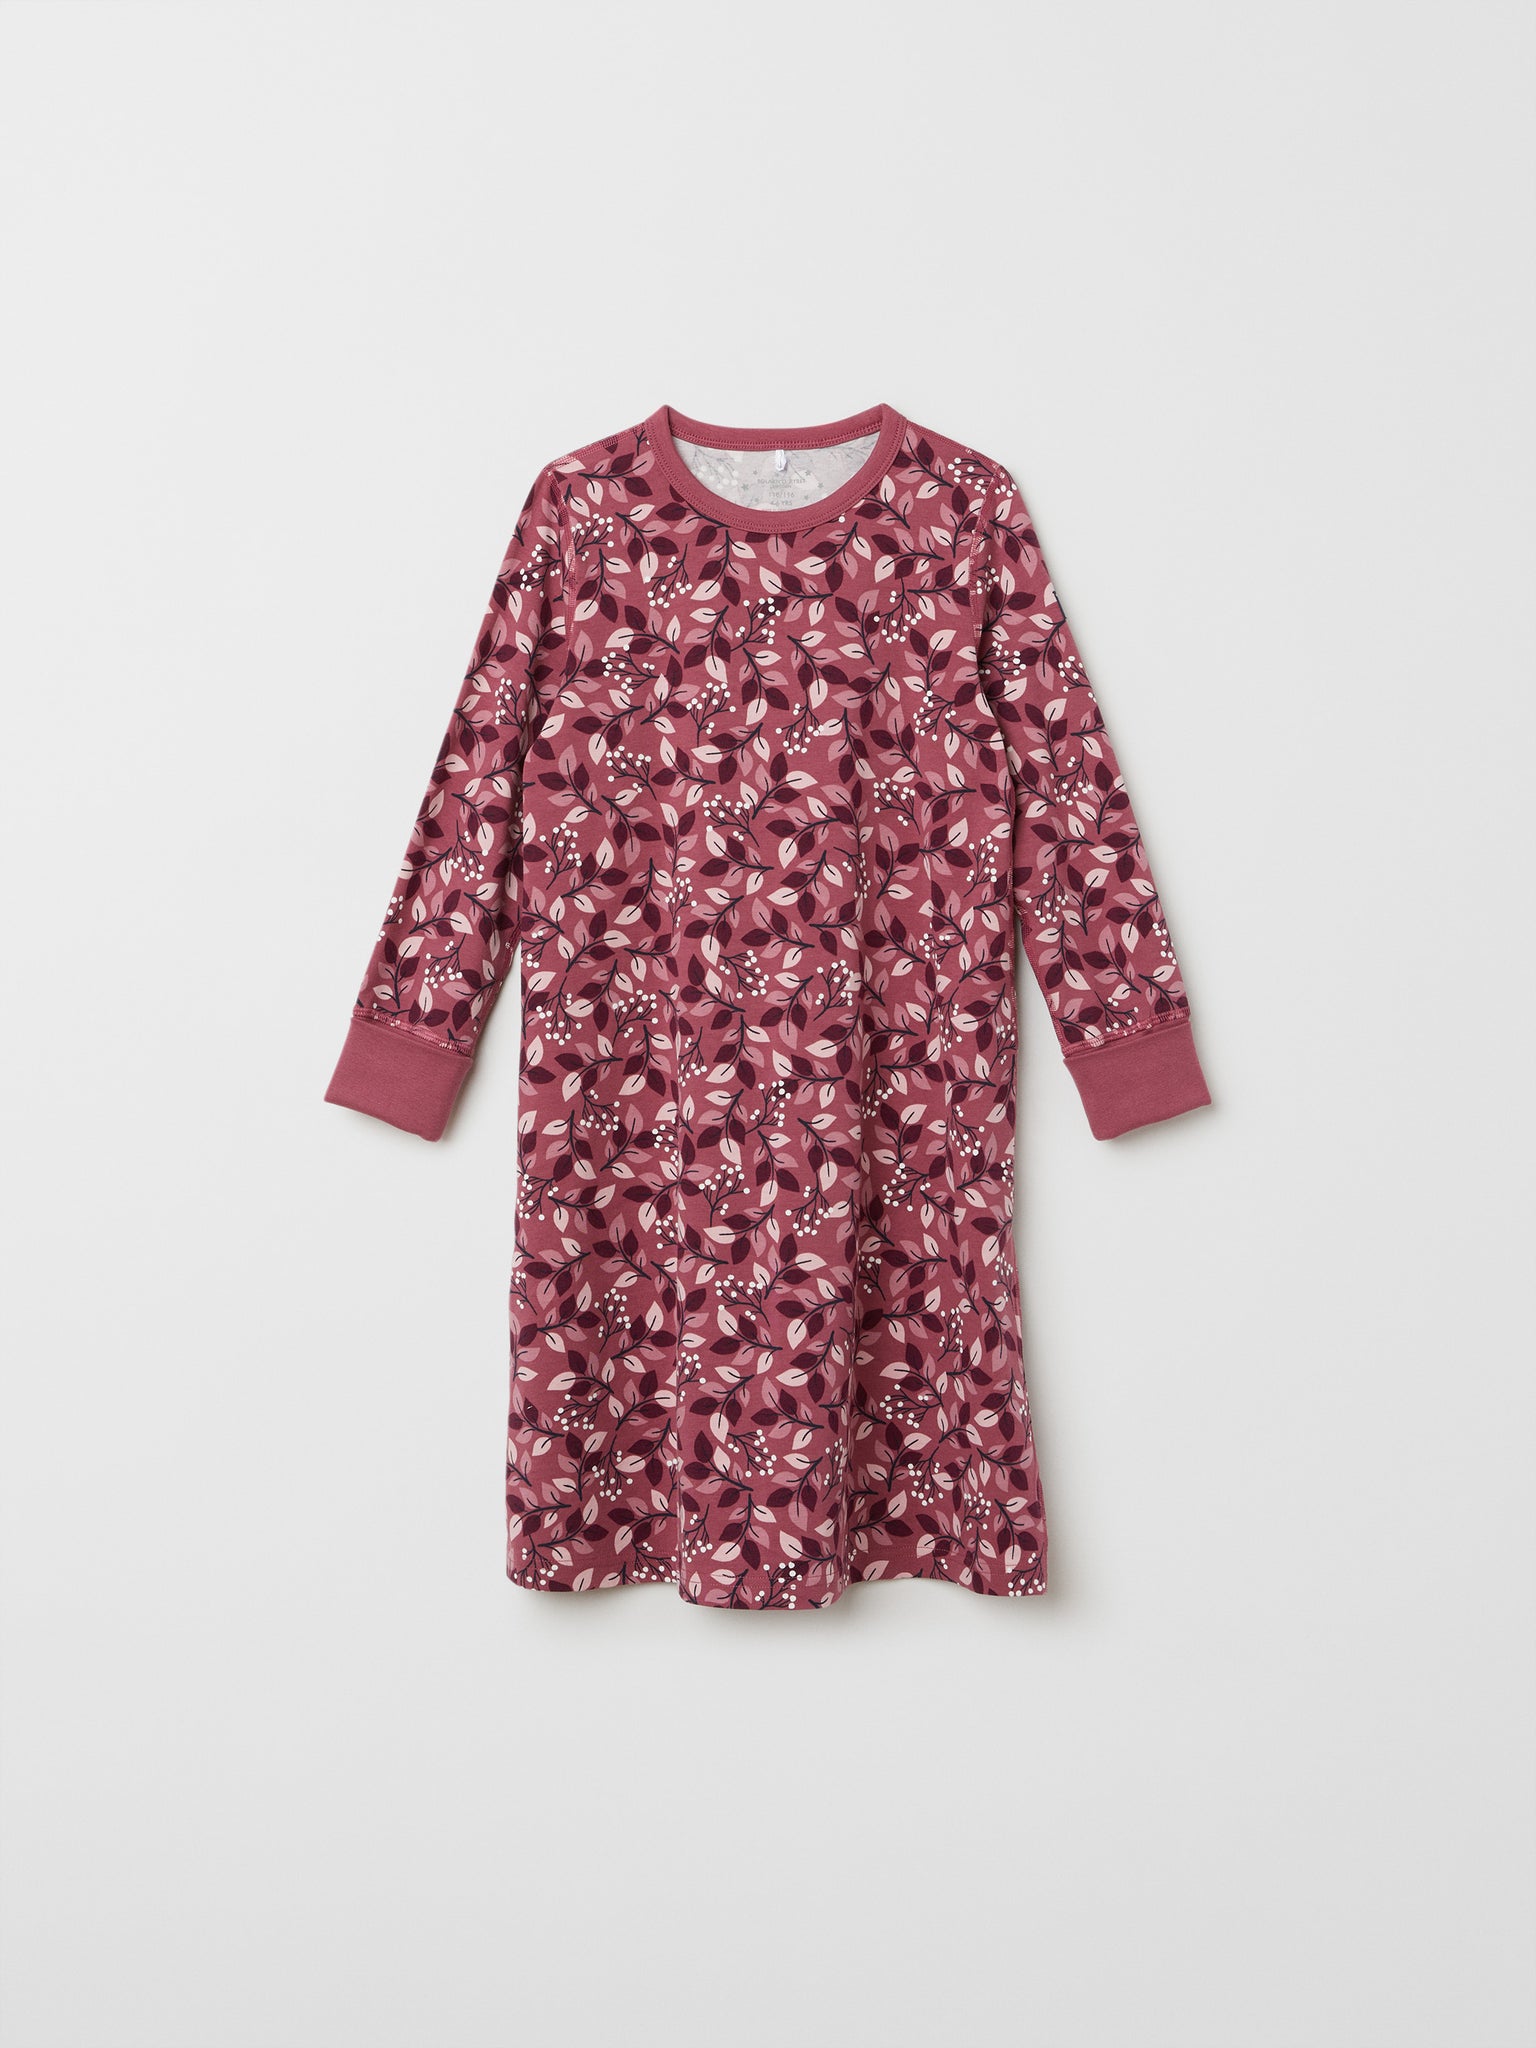 Organic Cotton Kids Nightdress from the Polarn O. Pyret adult collection. Clothes made using sustainably sourced materials.